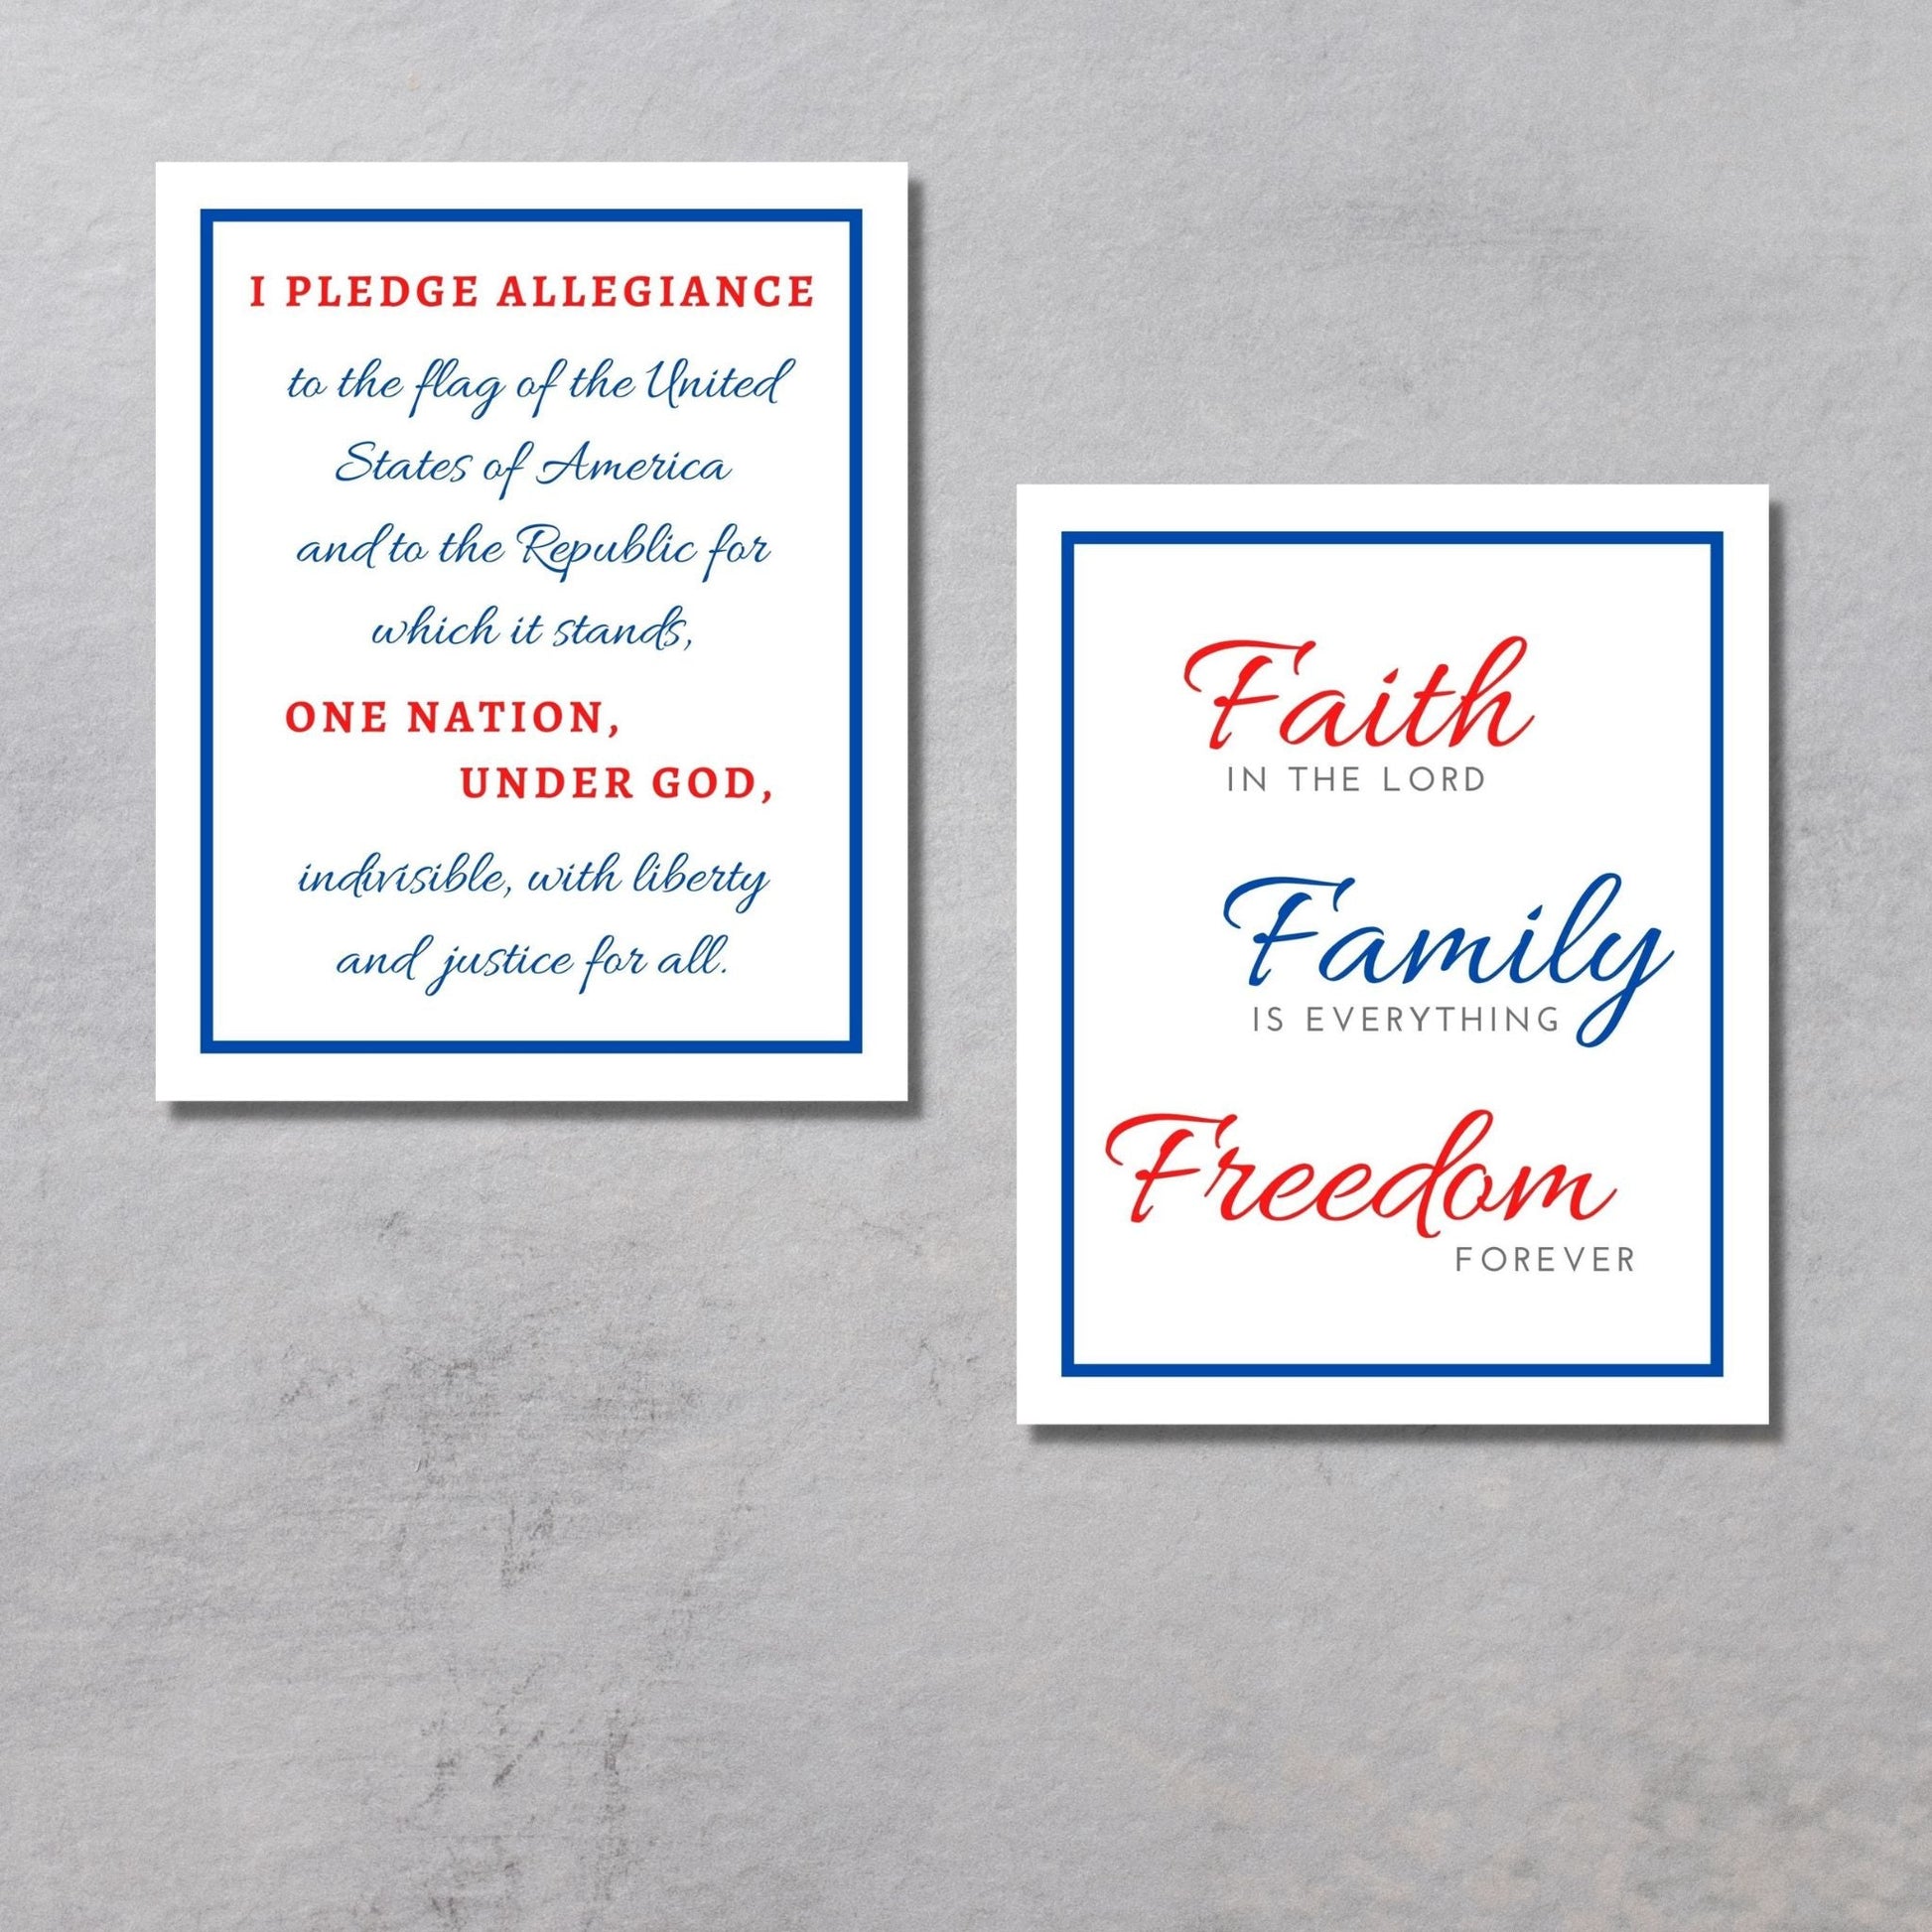 Patriotic Word Art - Pledge of Allegiance (8x10 print) | The Pledge of Allegiance Word Art Reads... I PLEDGE ALLEGIANCE to the flag of the United States of America and to the Republic for which it stands, ONE NATION, UNDER GOD, indivisible, with liberty and justice for all. | Shown with Inspirational Word Art Faith Family Freedom (8x10 print) | Reads... Faith IN THE LORD Family IS EVERYTHING Freedom FOREVER | Both shown in Color – Red, White, and Blue with Blue Border | oak7west.com